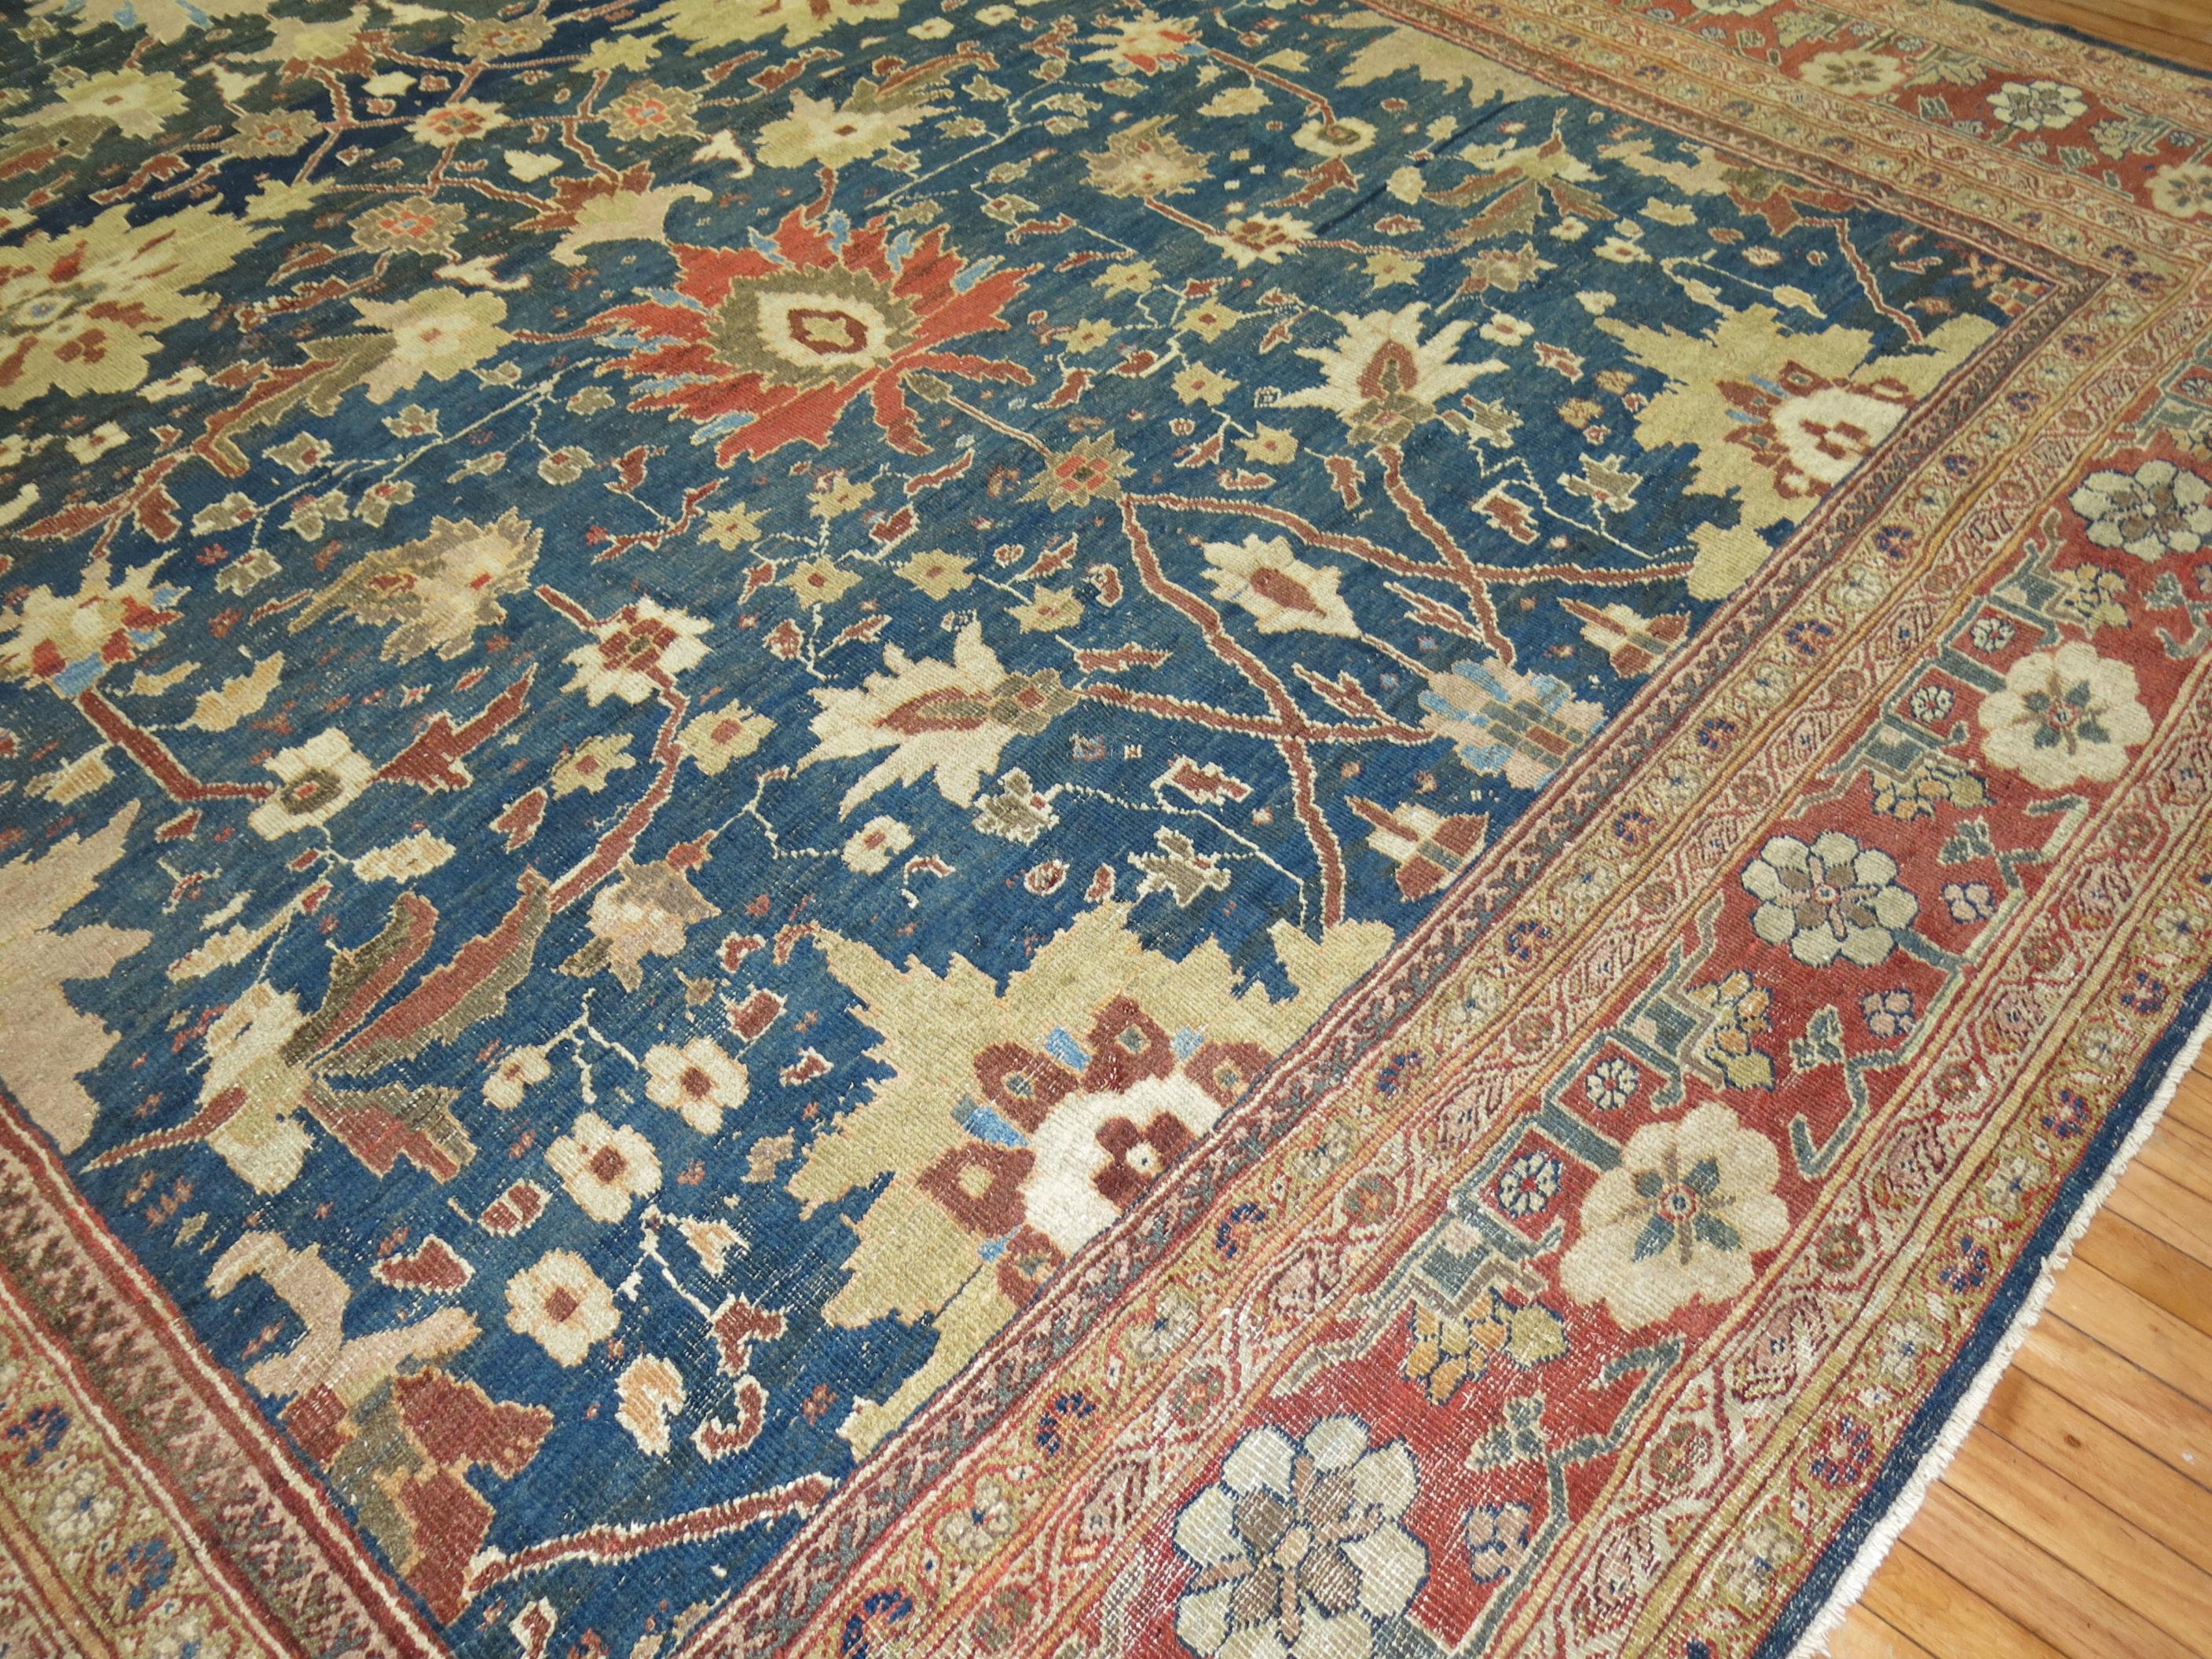 Hand-Woven Phenomenal Large Scale Antique Sultanabad Mahal Persian Carpet